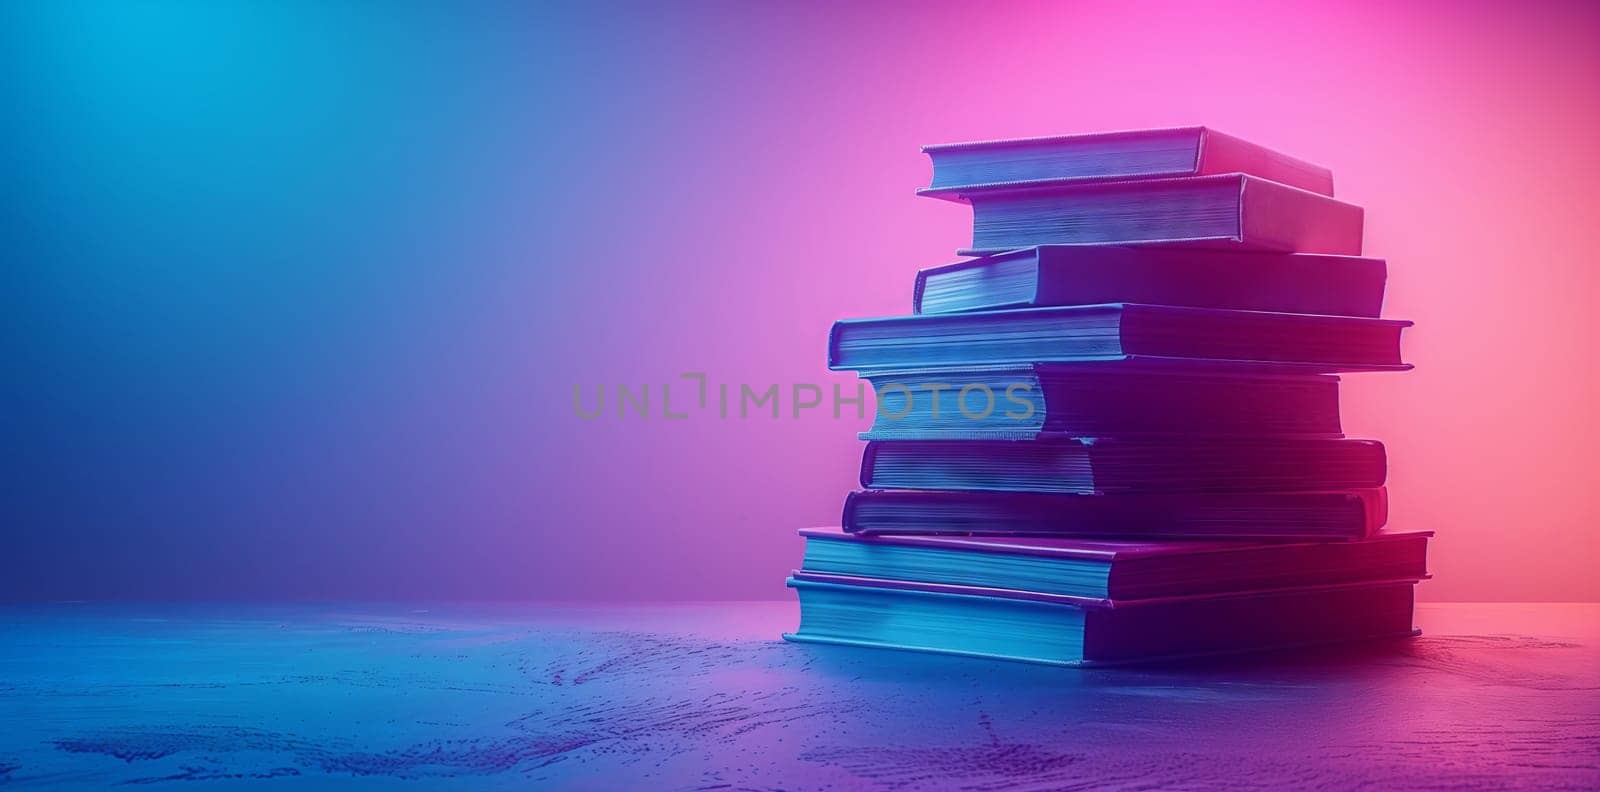 A stack of books in shades of violet and electric blue on a table by richwolf